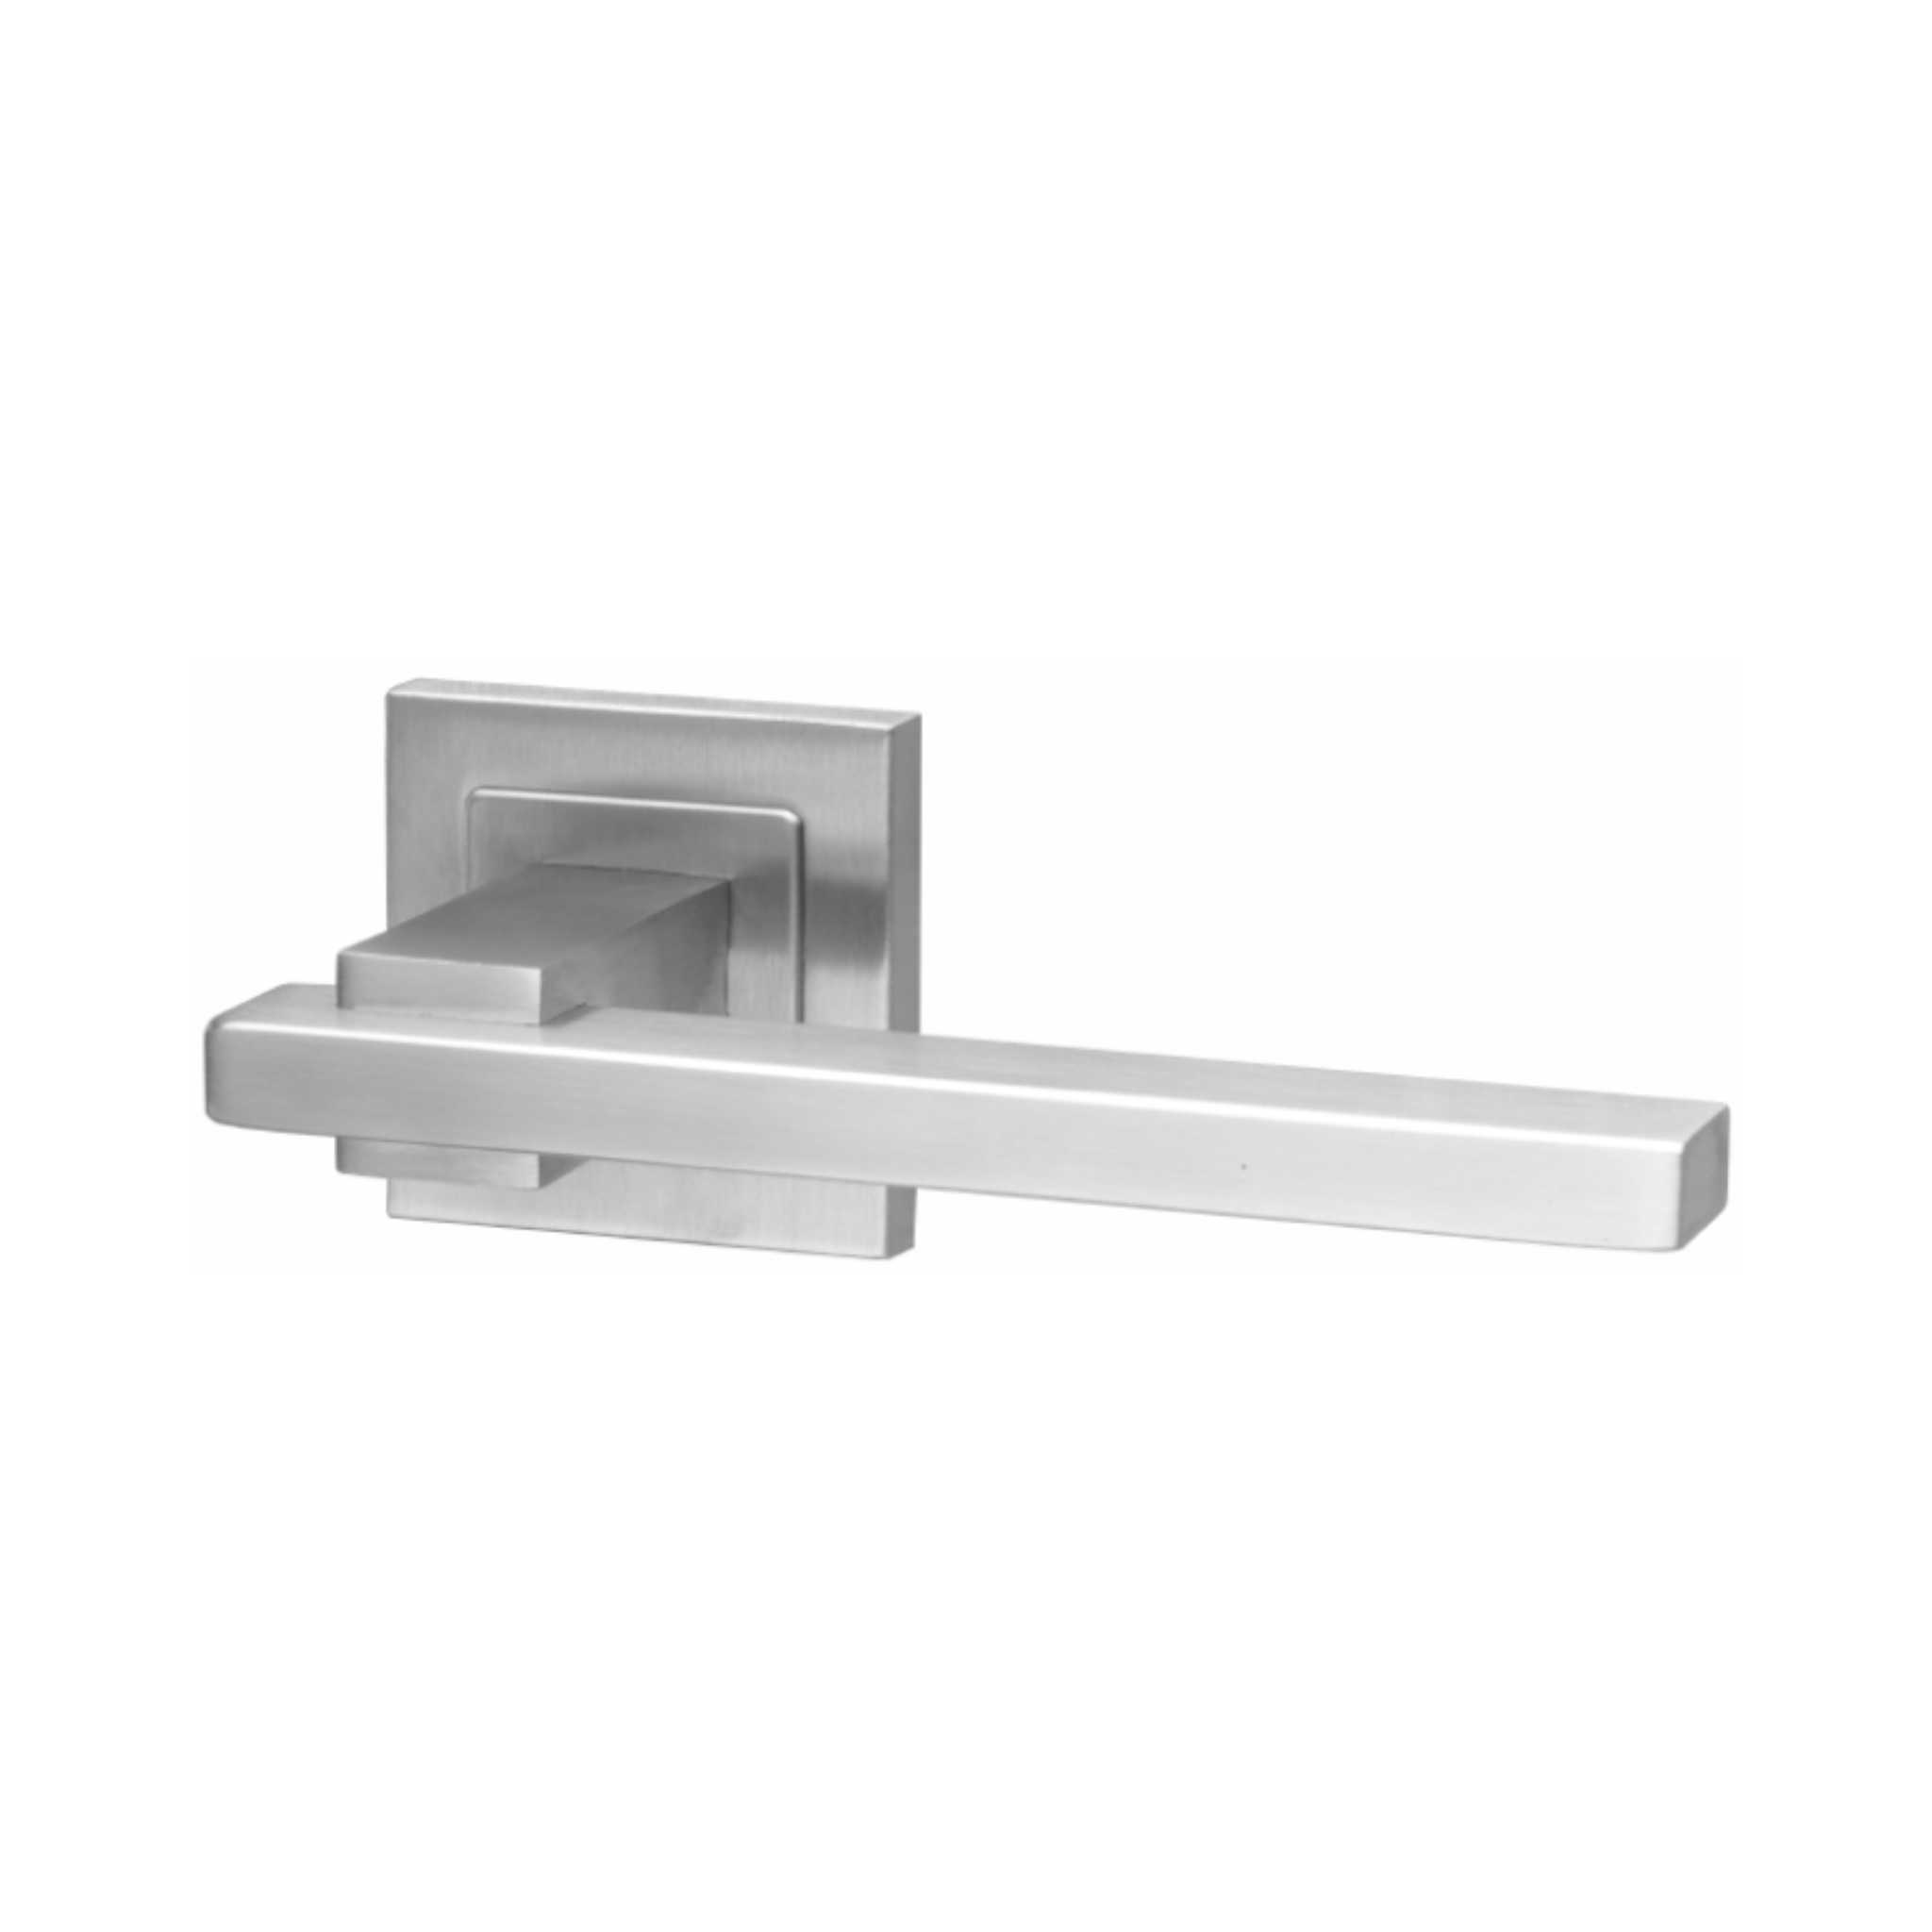 Sira, Lever Handles, Square, On Square Rose, With Escutcheons, Stainless Steel, QS